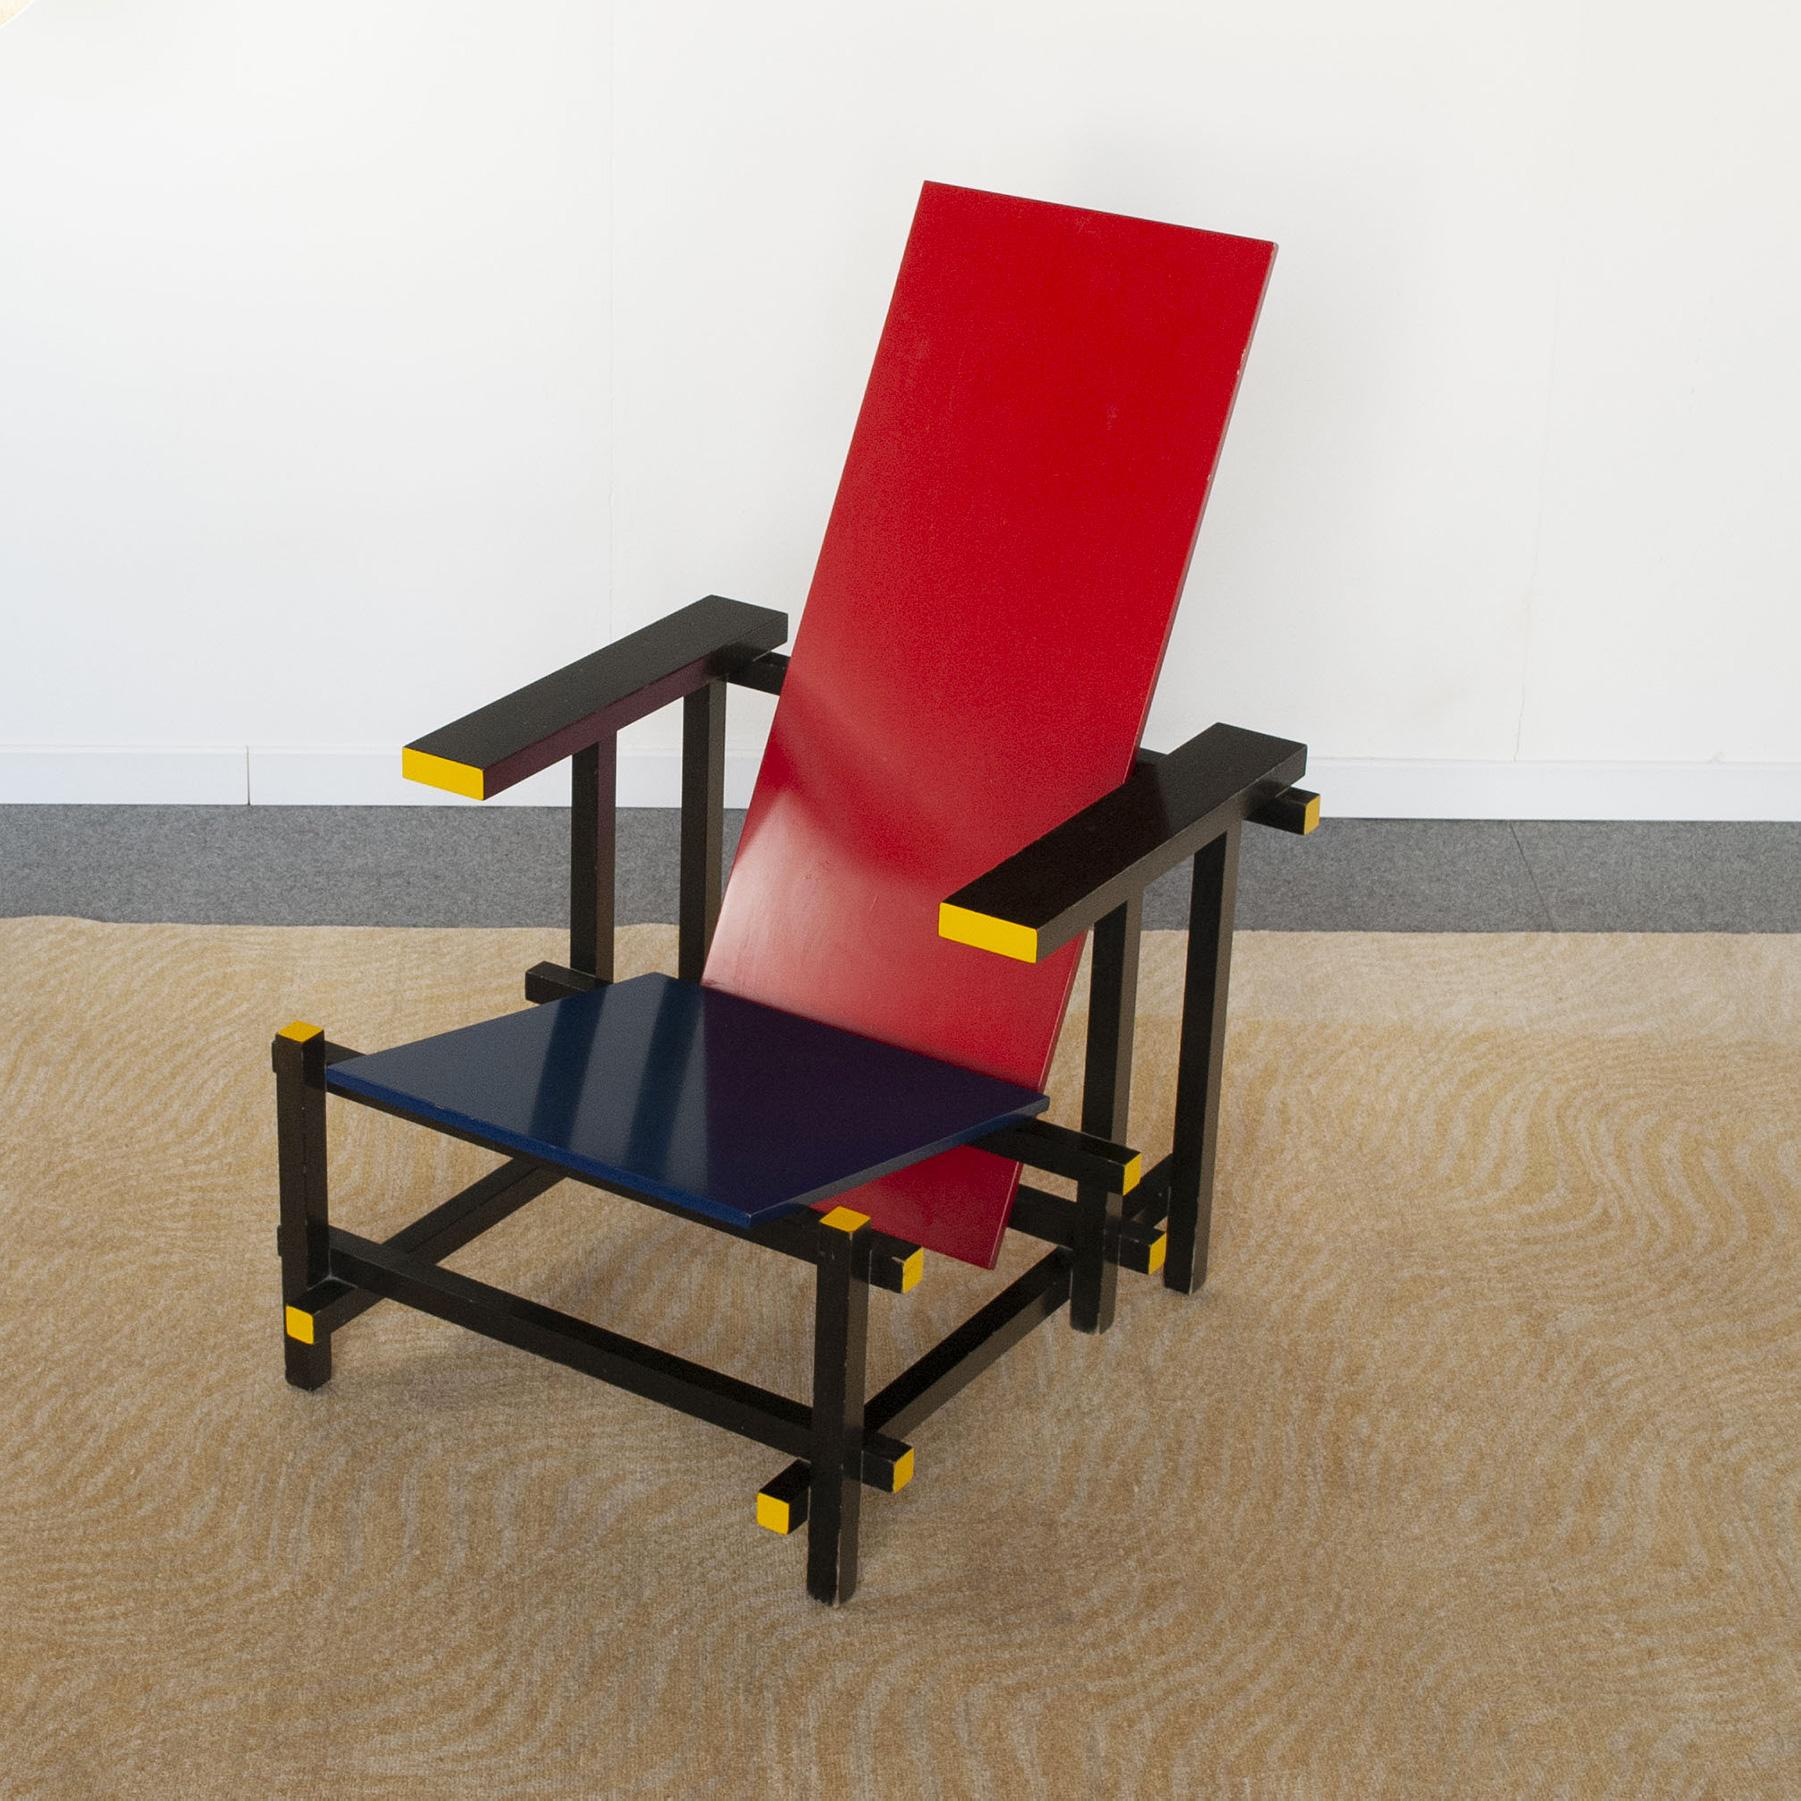 A world icon of neo-plasticist design this chair armchair called Rood Blauwe (Red and Blue) by its Dutch designer Gerrit Thomas Rietveld, Cassina production in the 1960s.